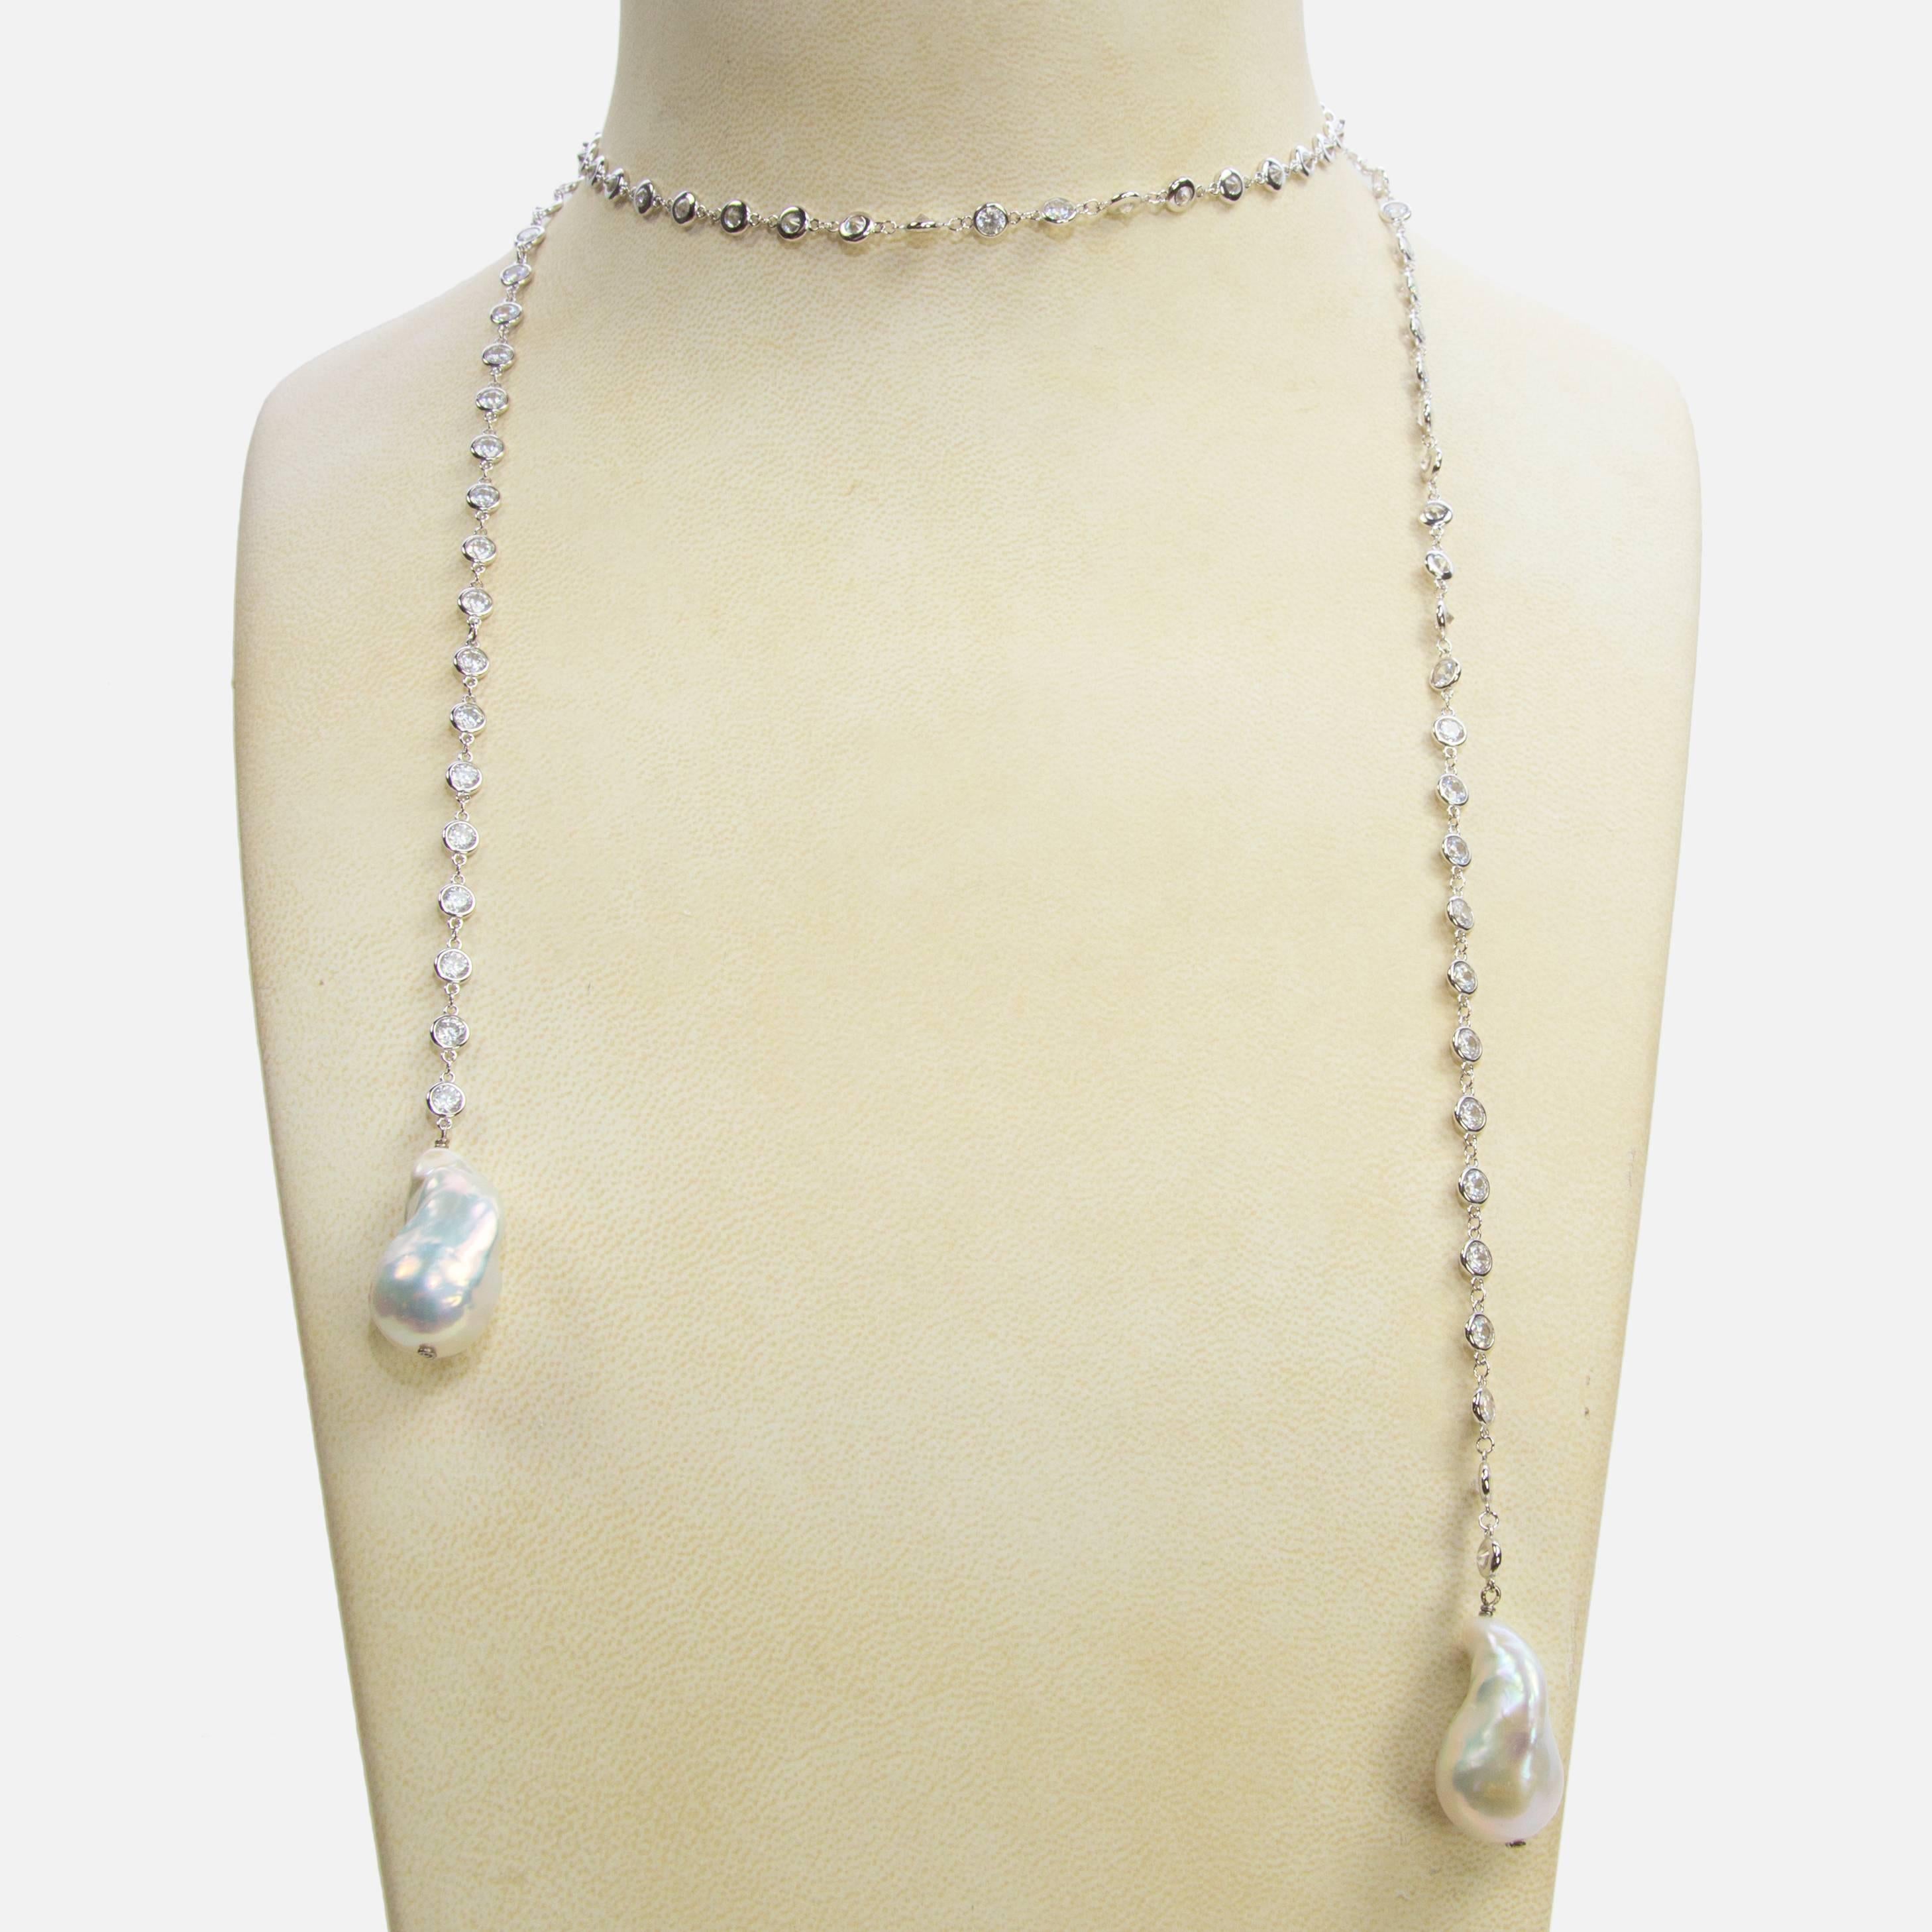 Contemporary Striking Faux Diamond Baroque Pearl Lariat Sterling Silver Runway Necklace